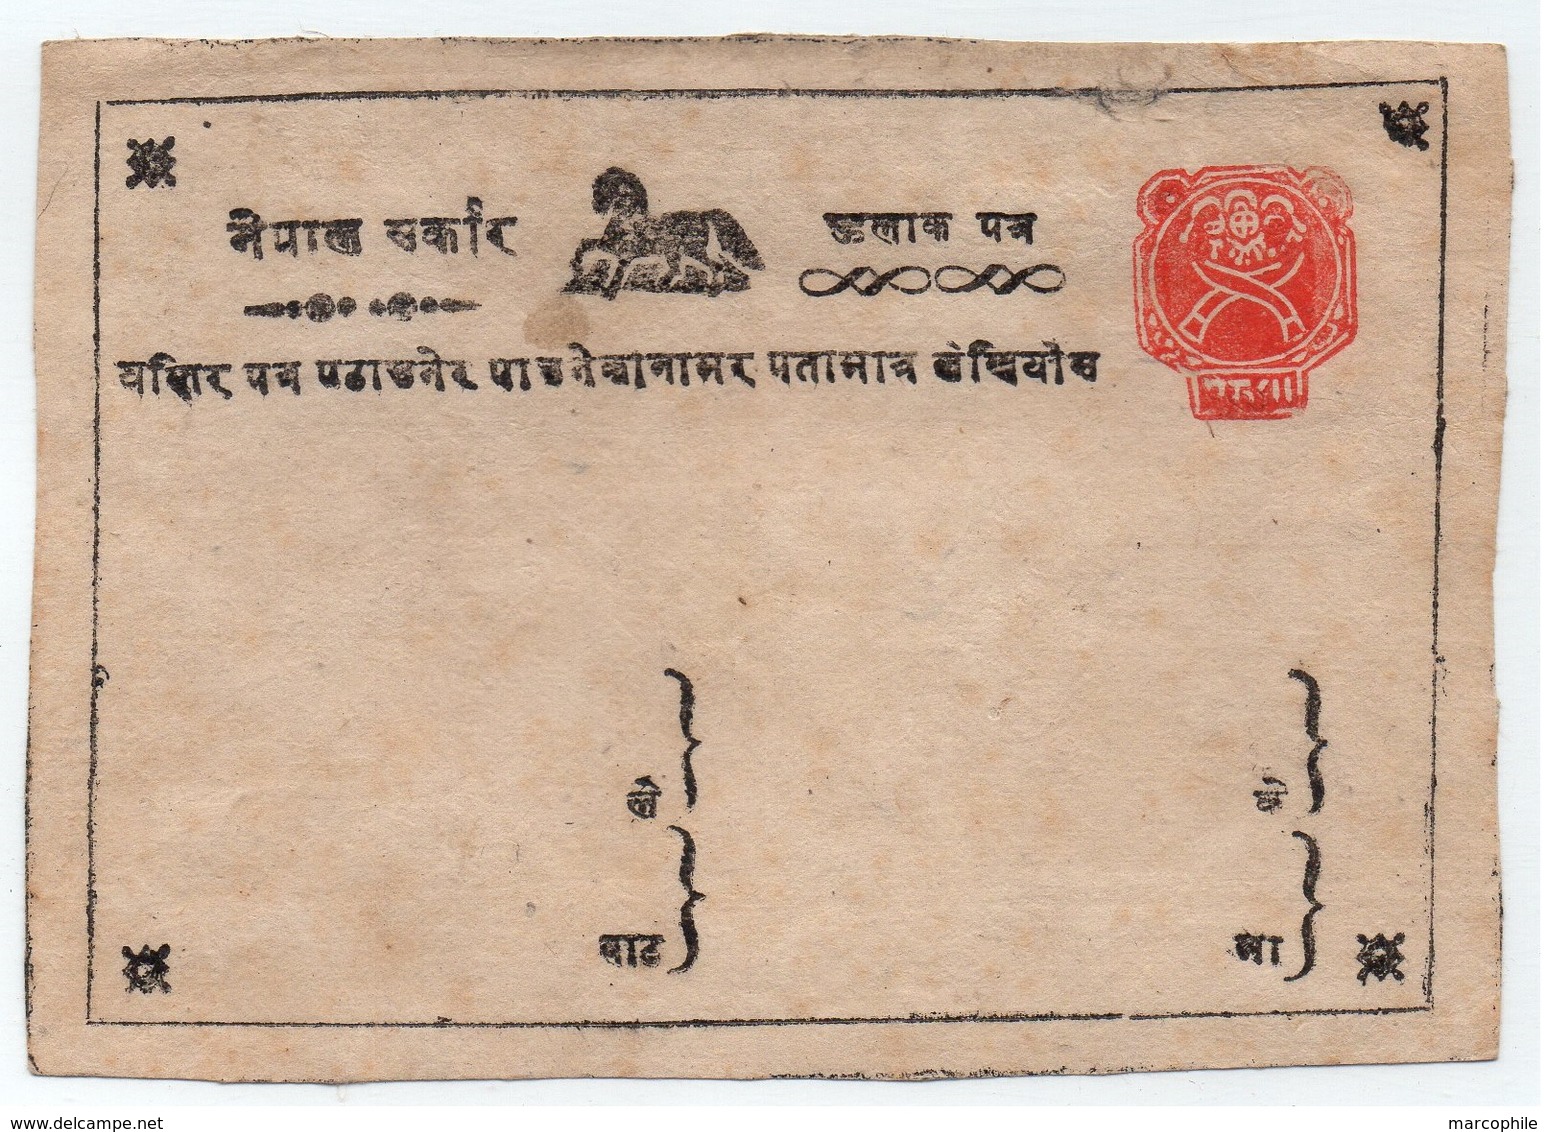 INDIA - INDE - NEPAL - CHEVAL - HORSE / ENTIER POSTAL - STATIONERY (ref LE4146) - Nepal